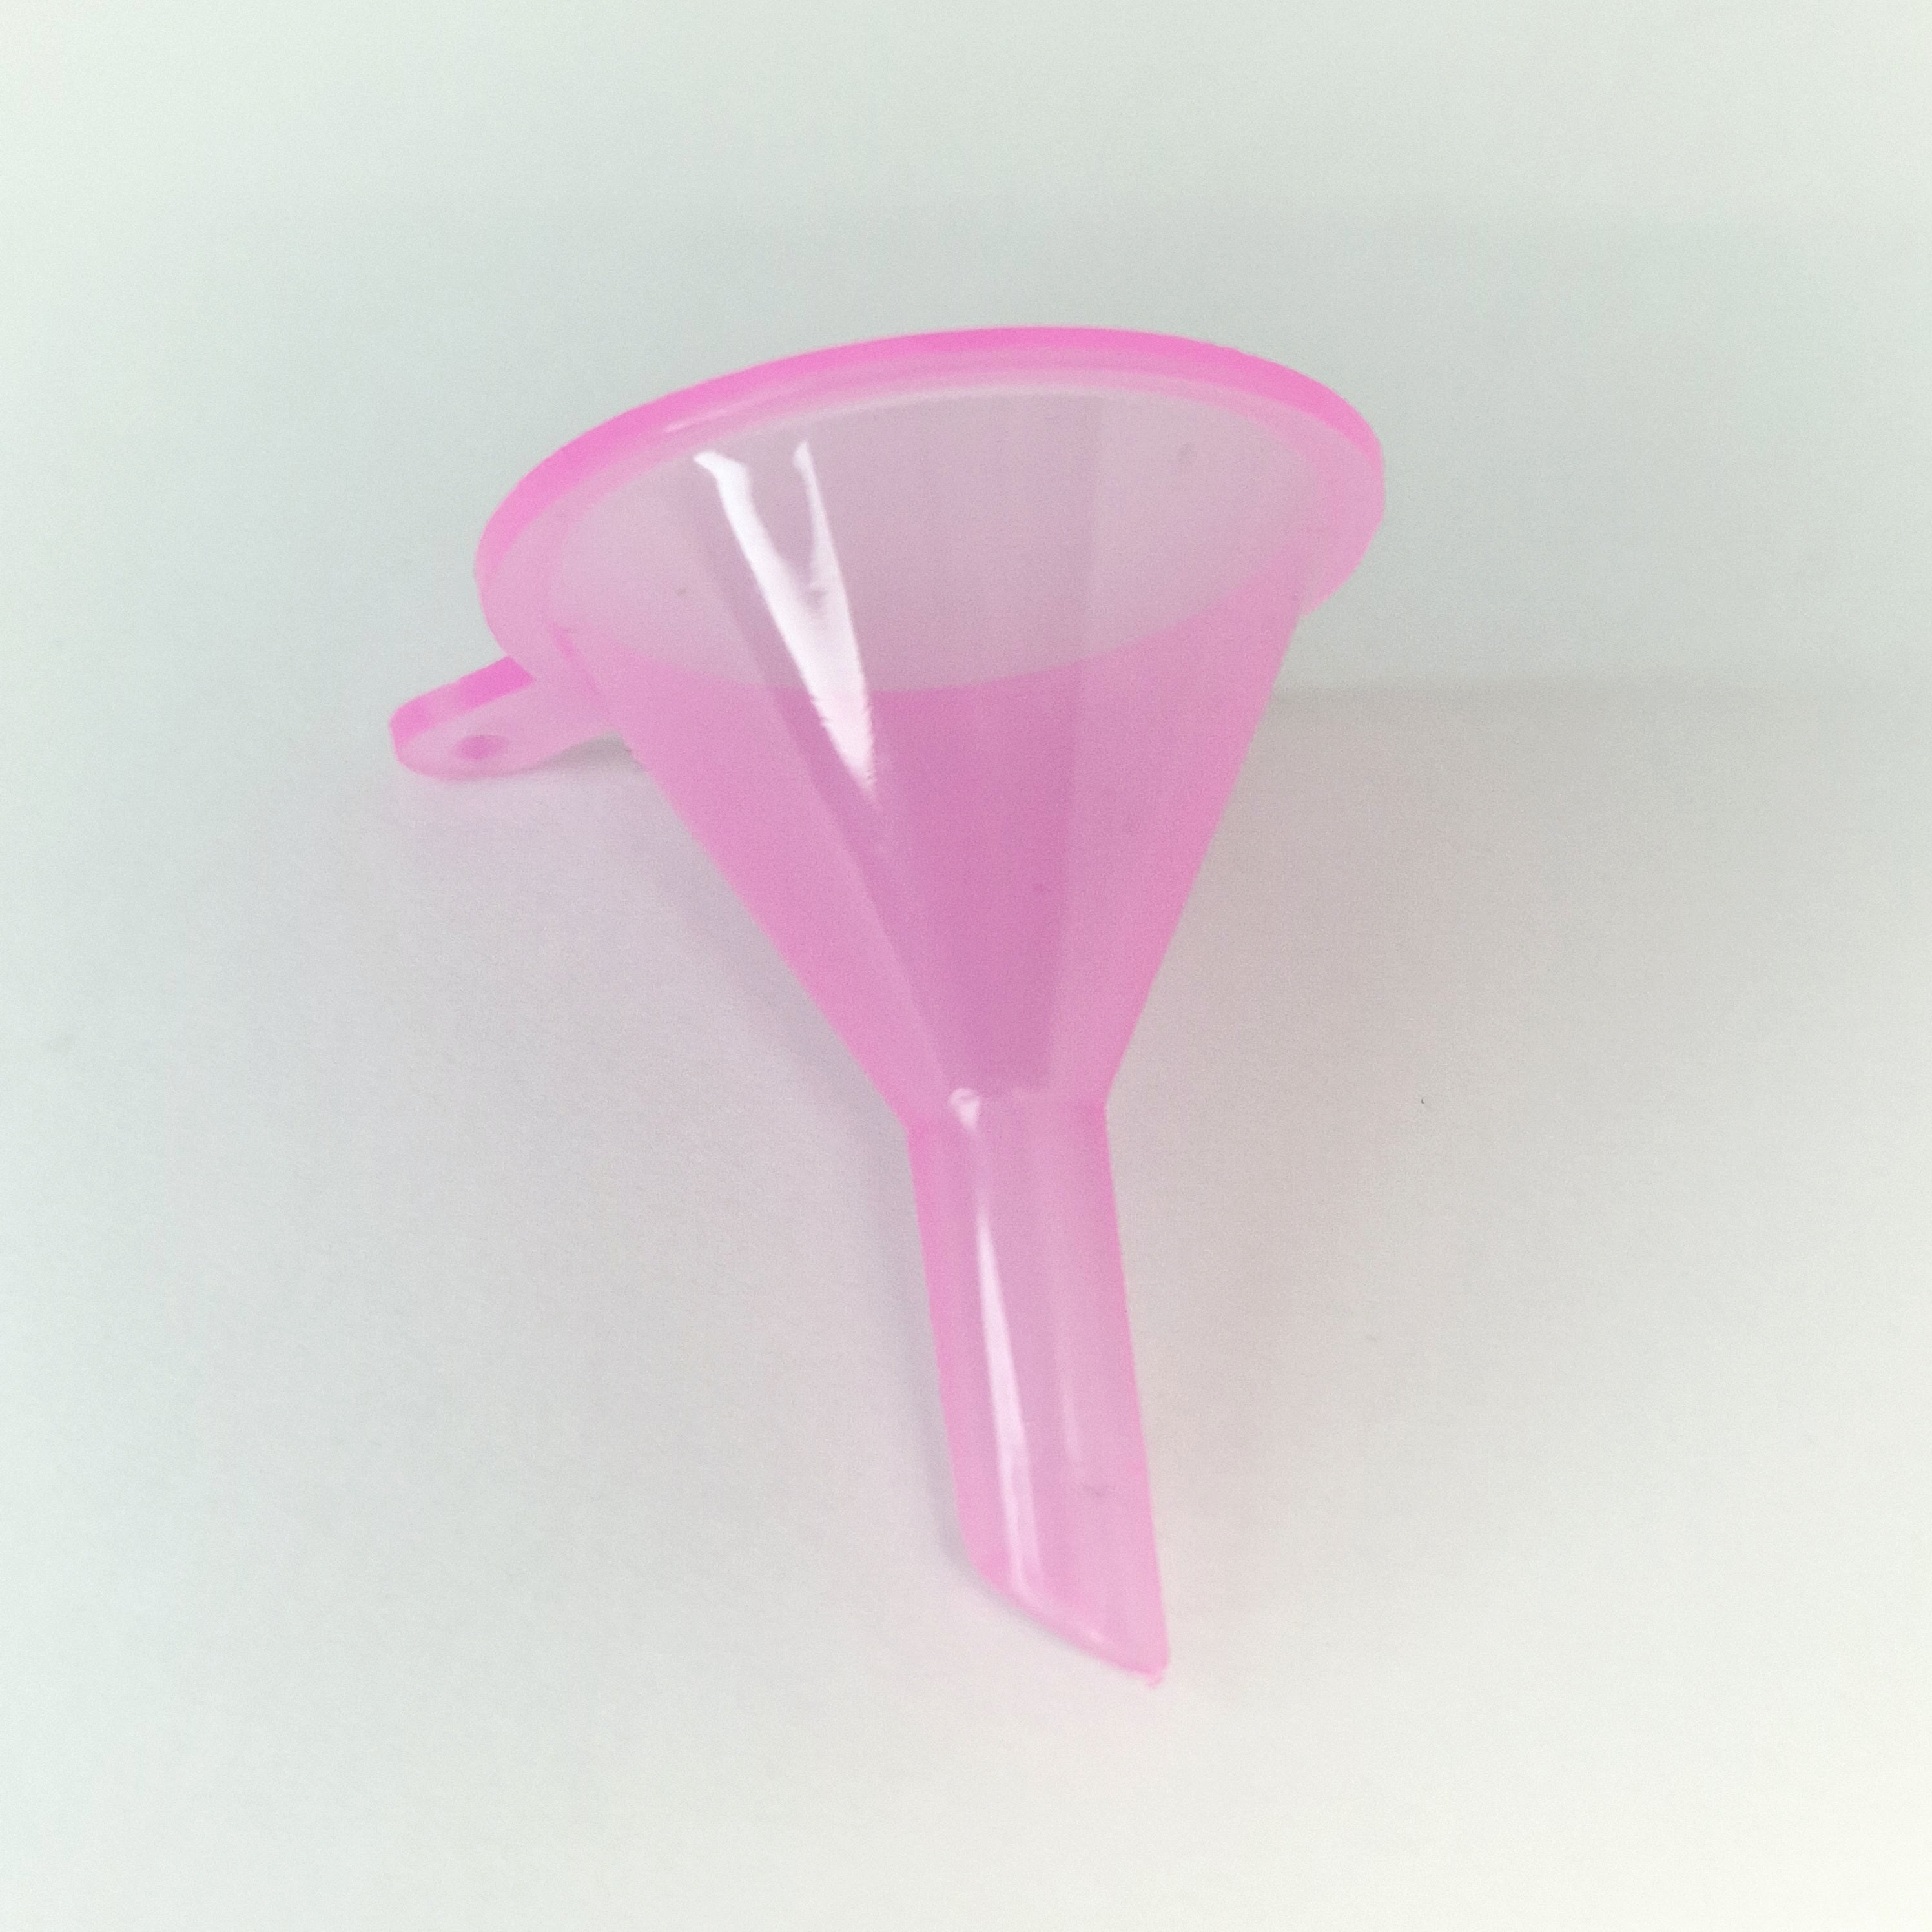 MajorCrafts 12pcs Pink Mini Funnels For Micro Beads, Perfumes, Essential Oils, Sand art, Spices, Travel Bottles etc.